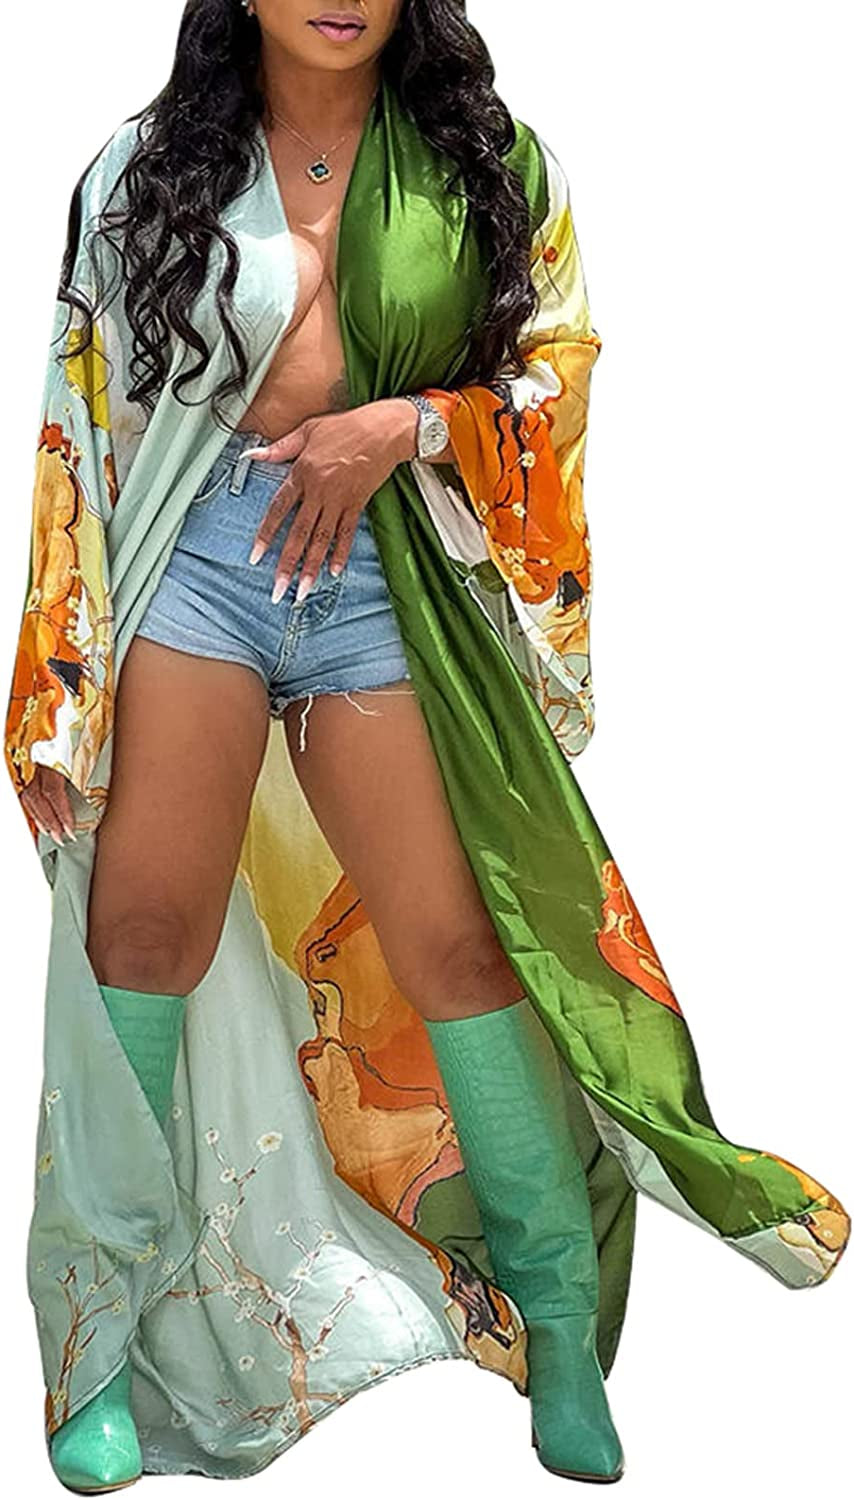 Women'S Floral Print Satin Robe Kimono Cardigan Open Front Long Cover Ups Outerwear One Size